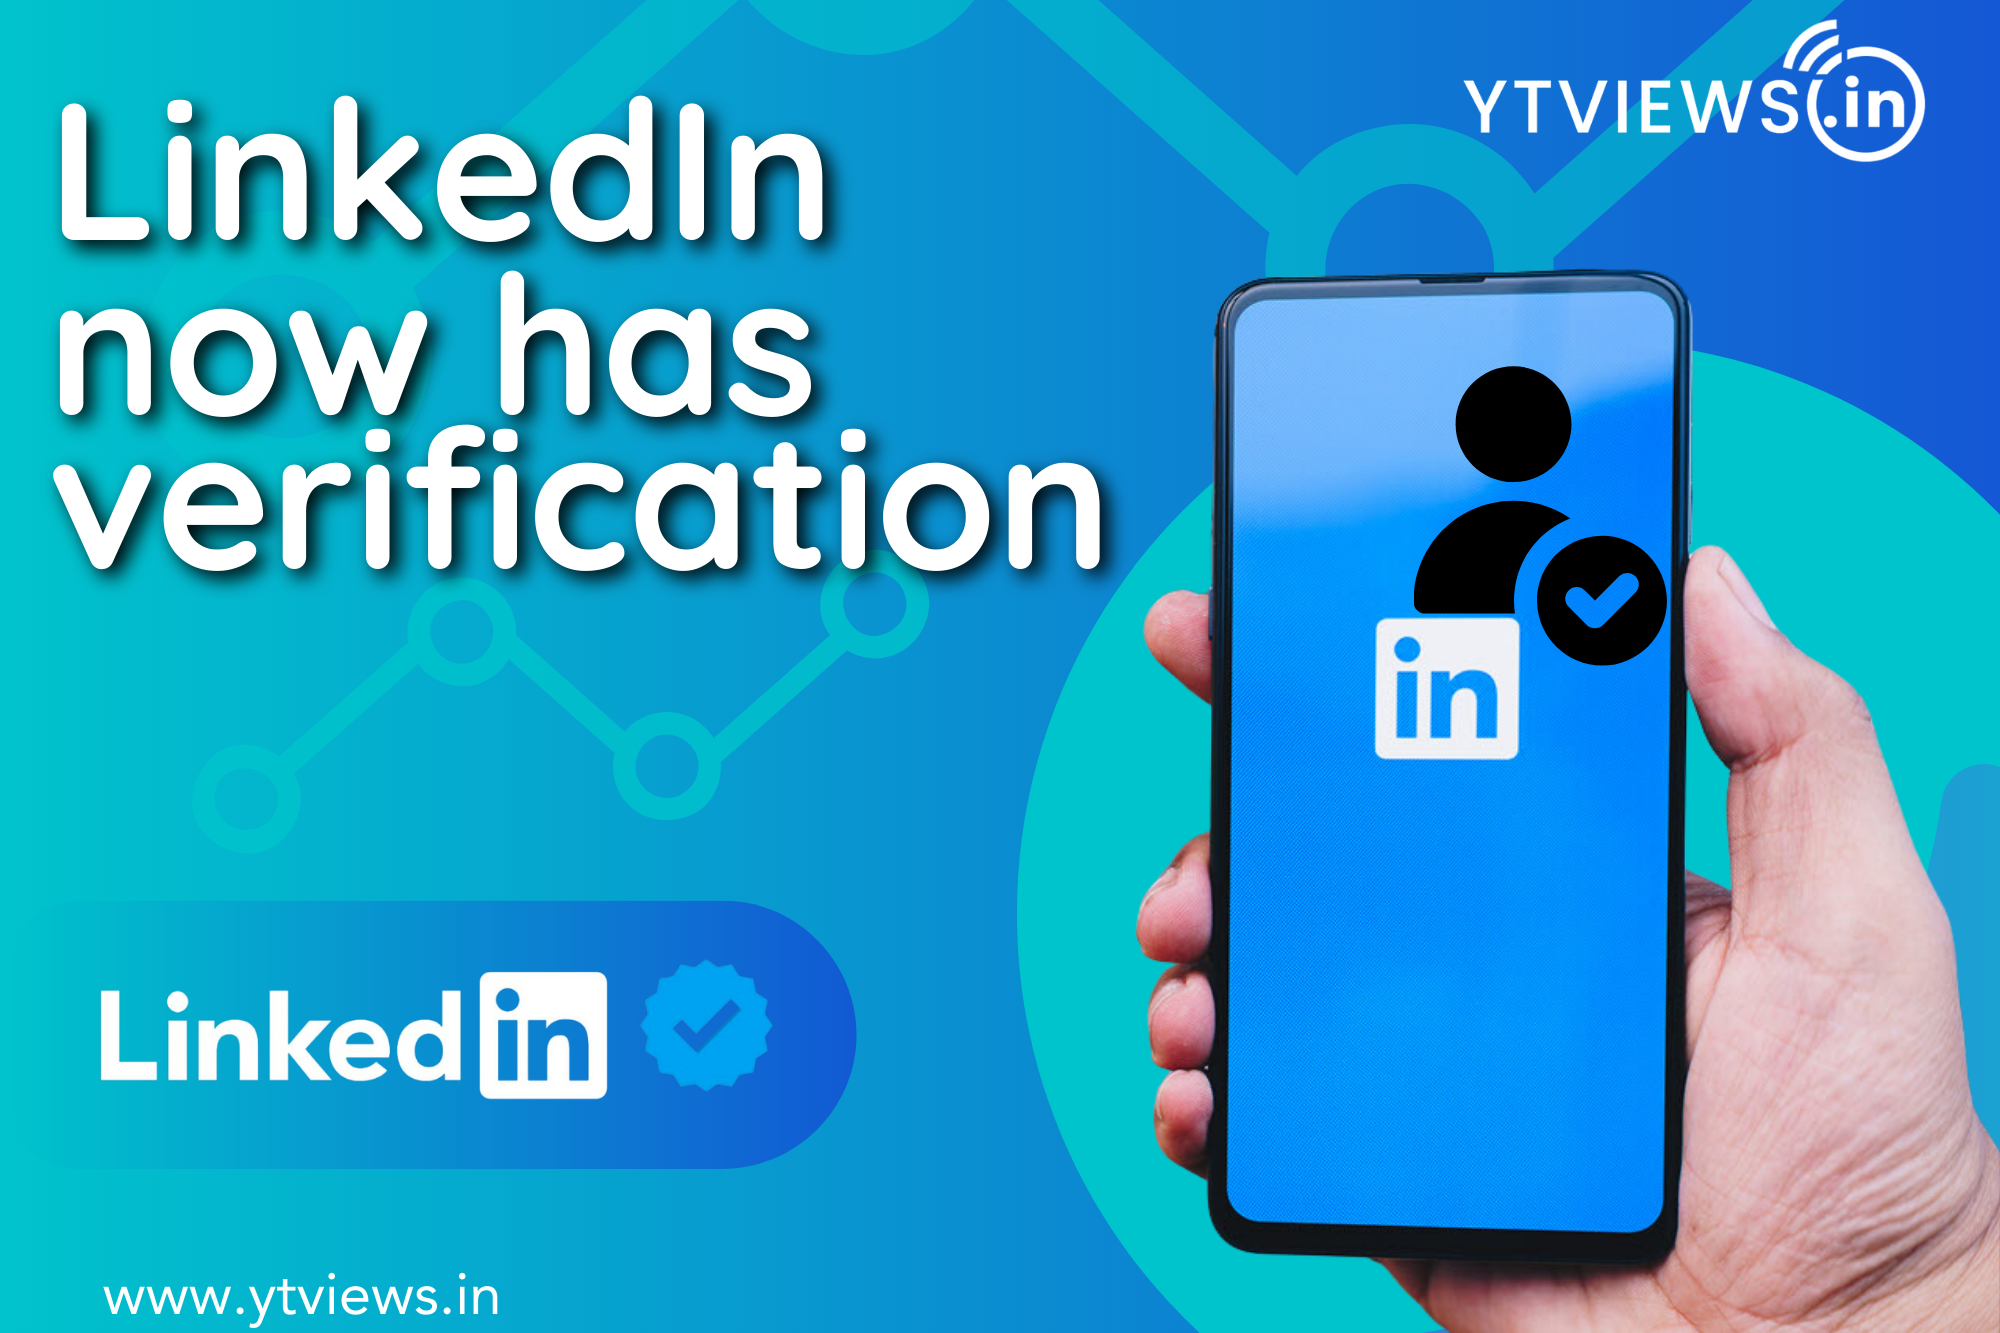 LinkedIn’s launches the verification feature in its new update